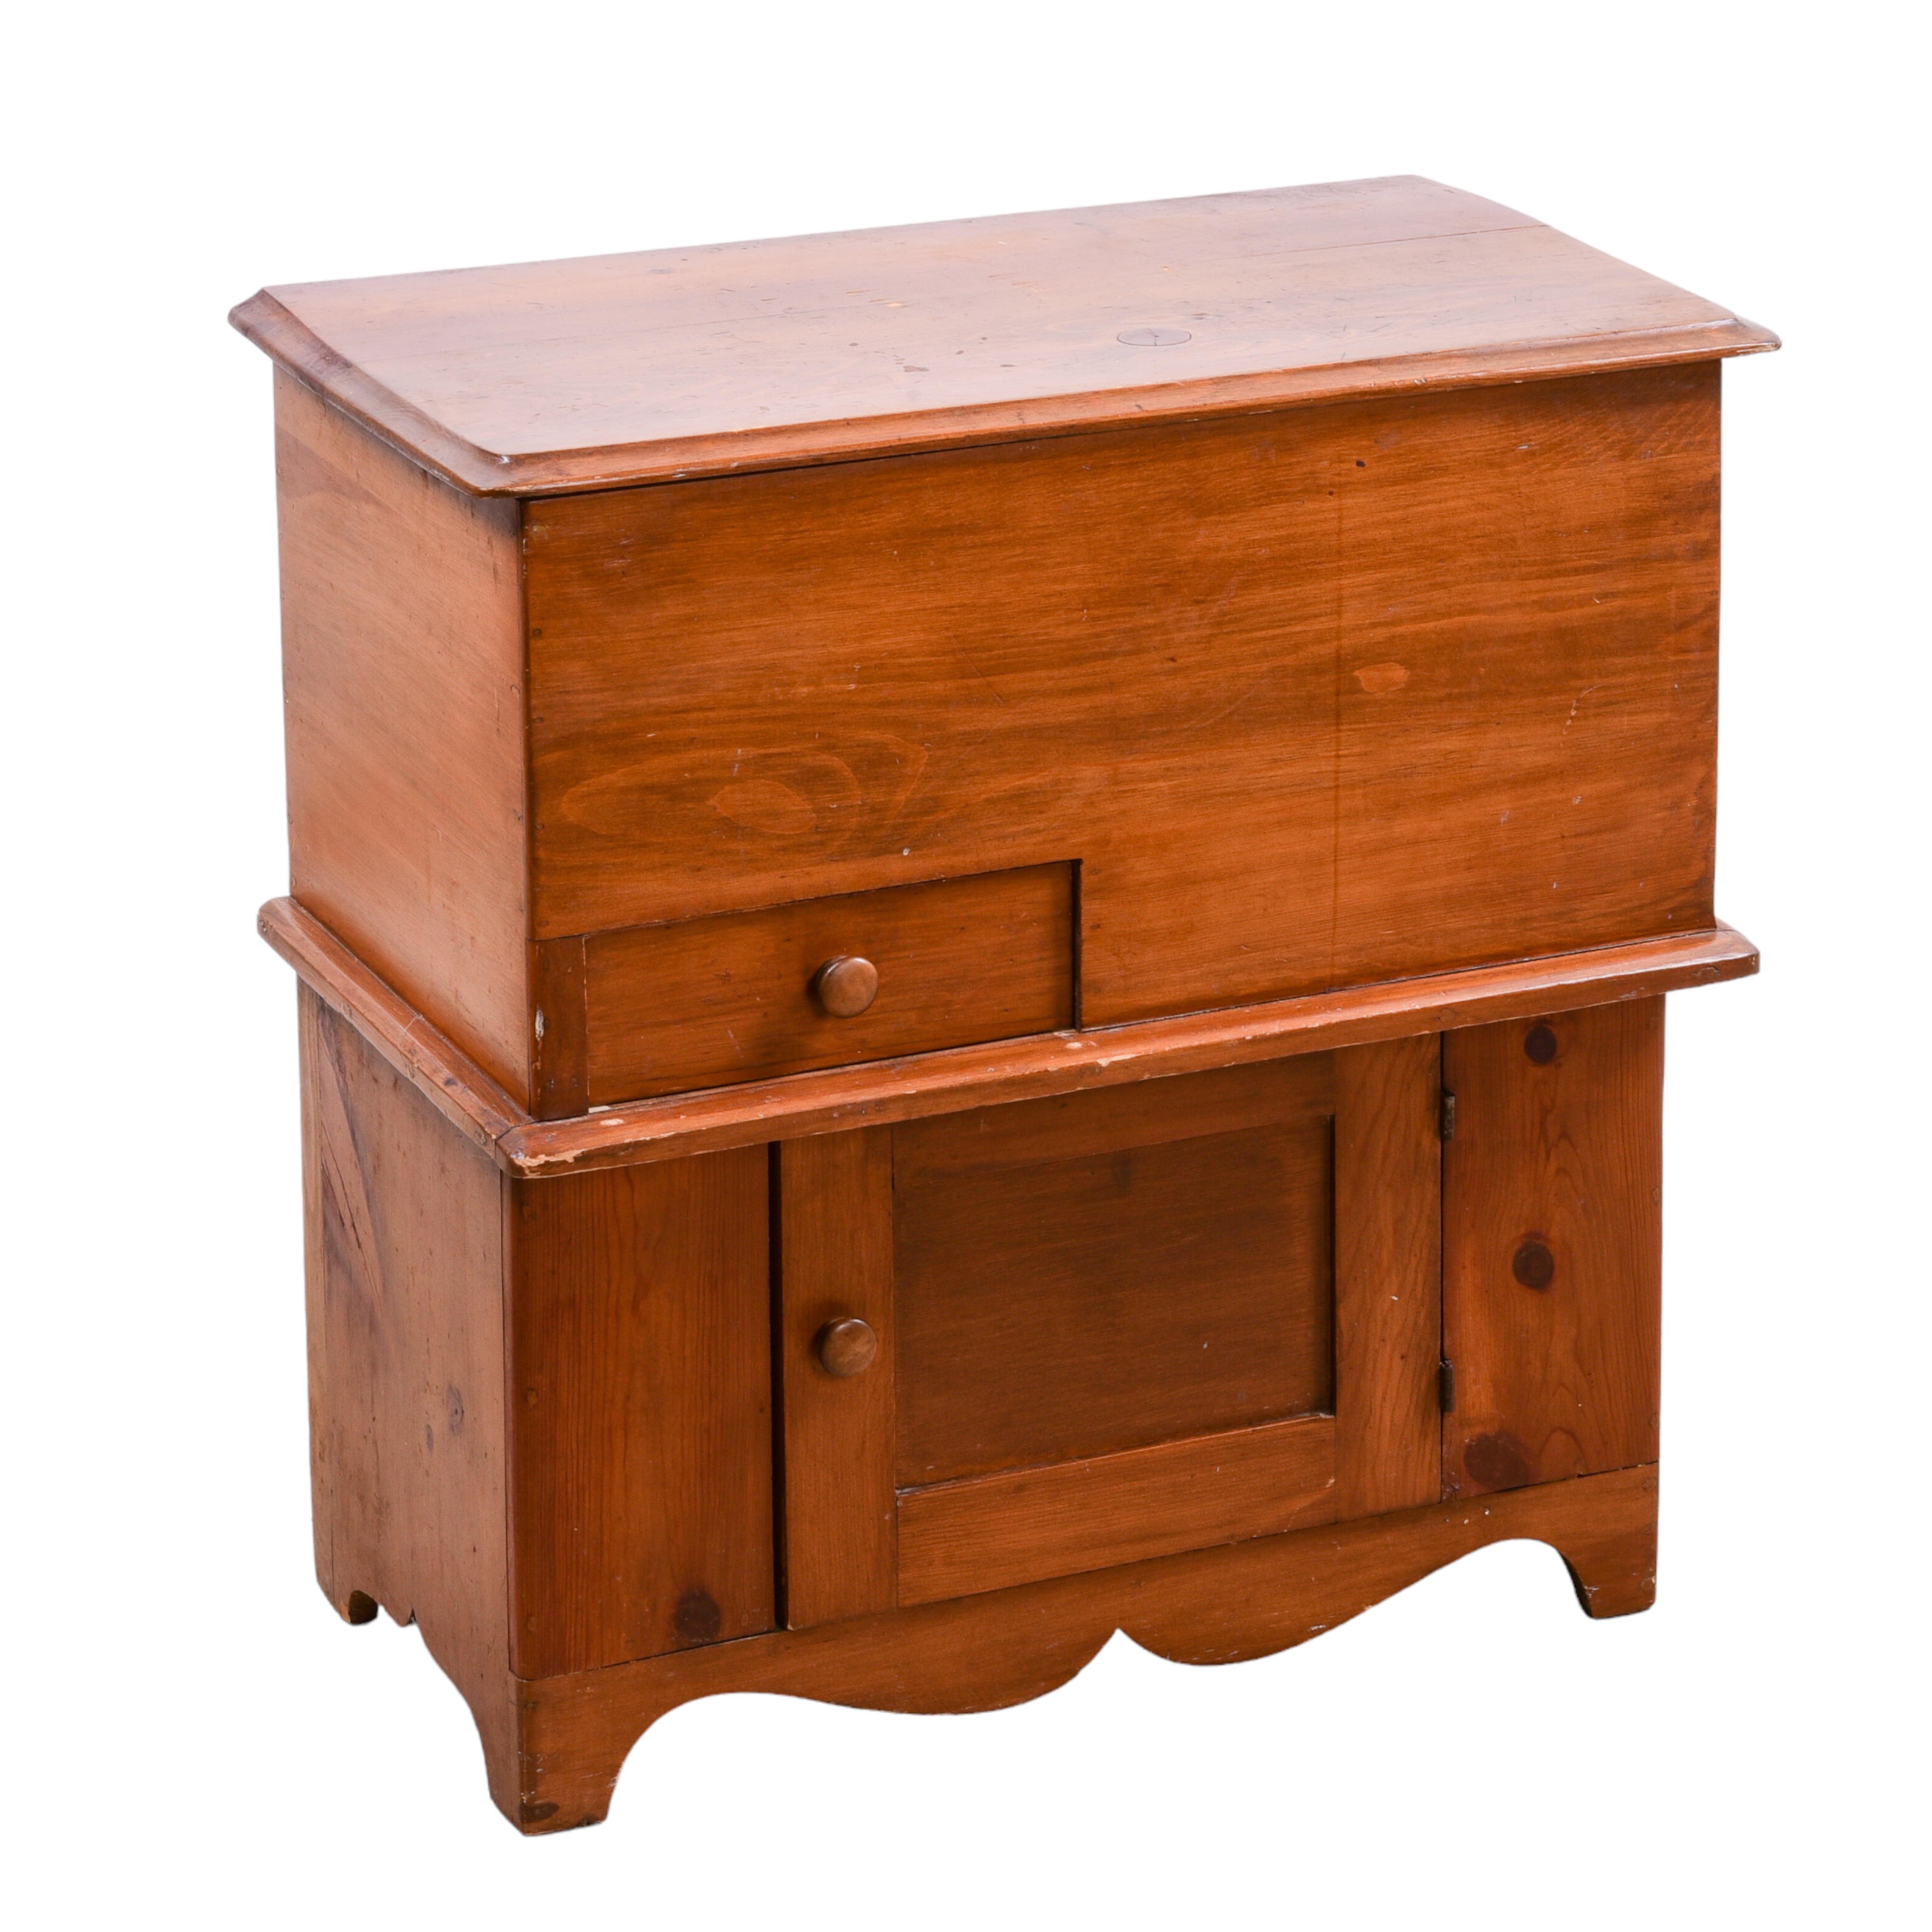 Pine chest, top with lift lid with